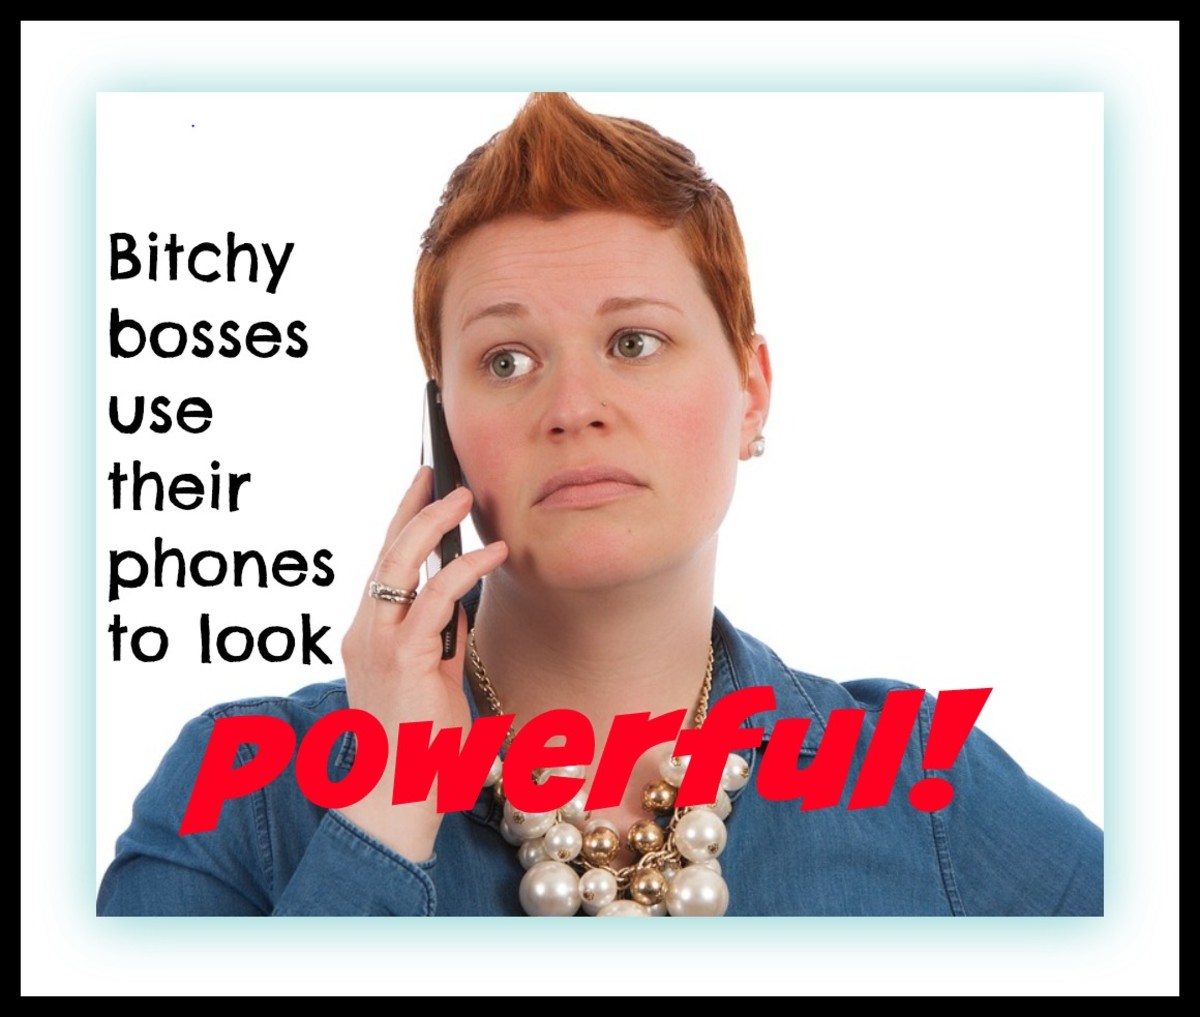 My bitchy boss used her phone as a weapon against me, making herself look important and me look foolish.